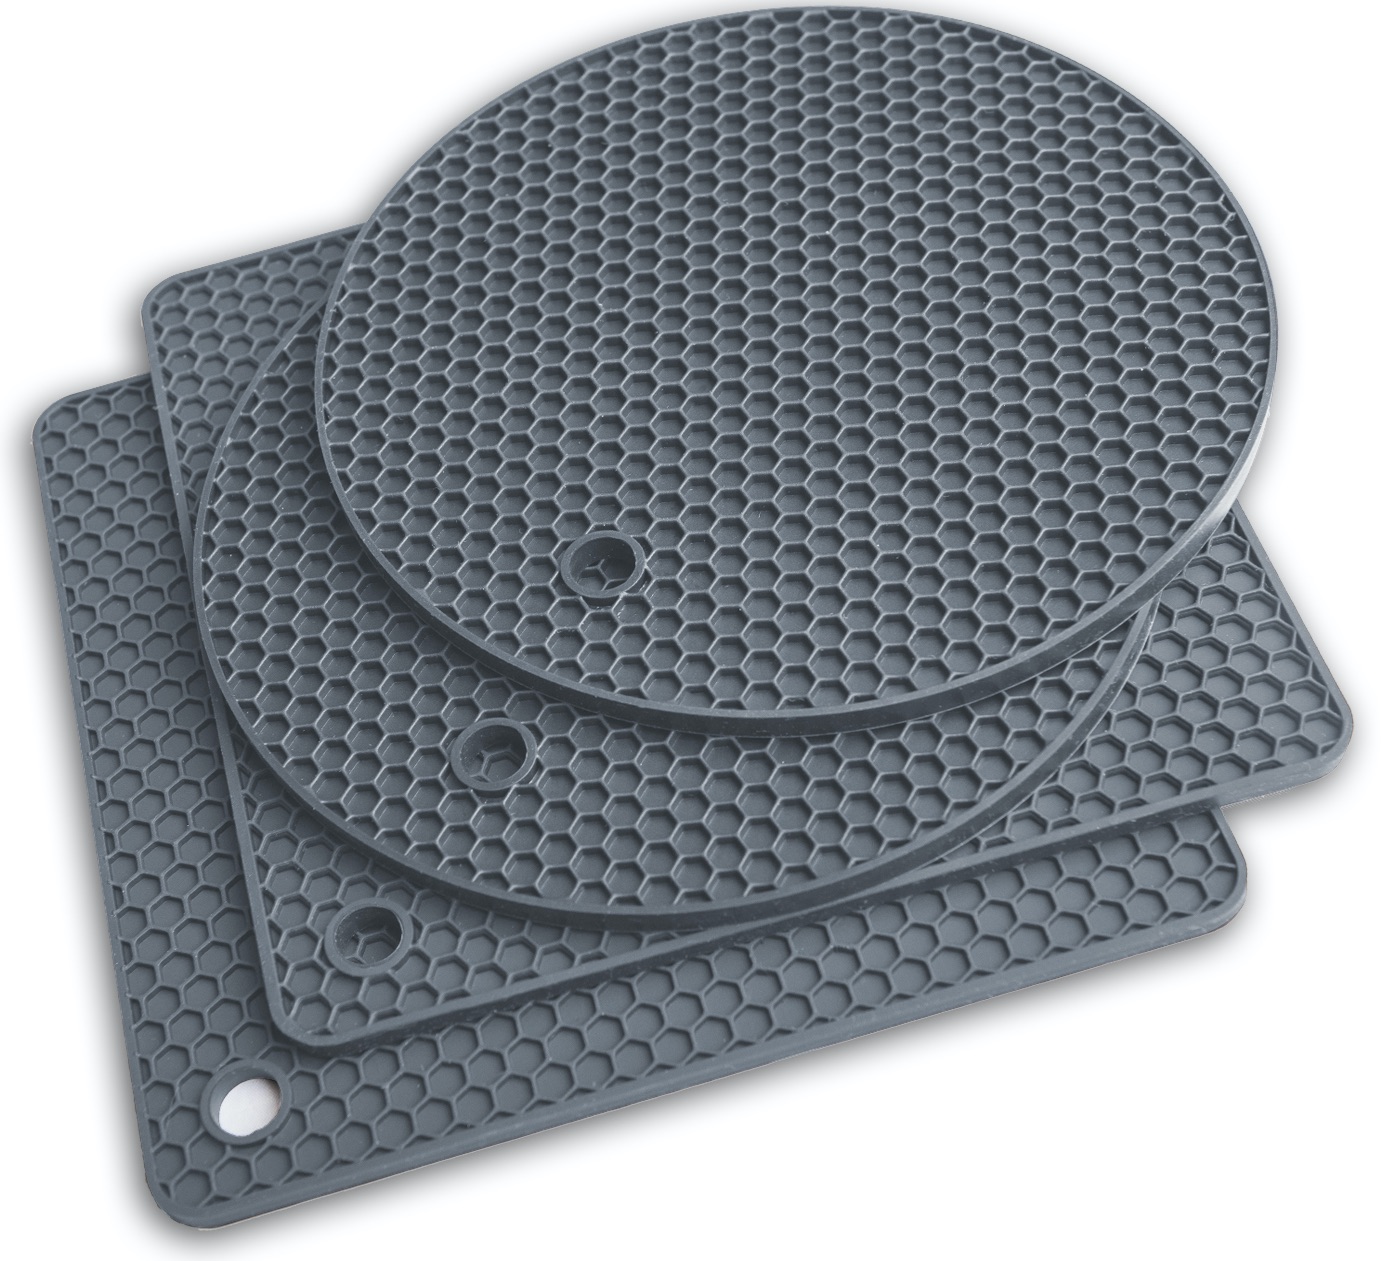 YOUTHINK Kitchen Silicone Mats, Foldable Silicone Mat For Kitchen